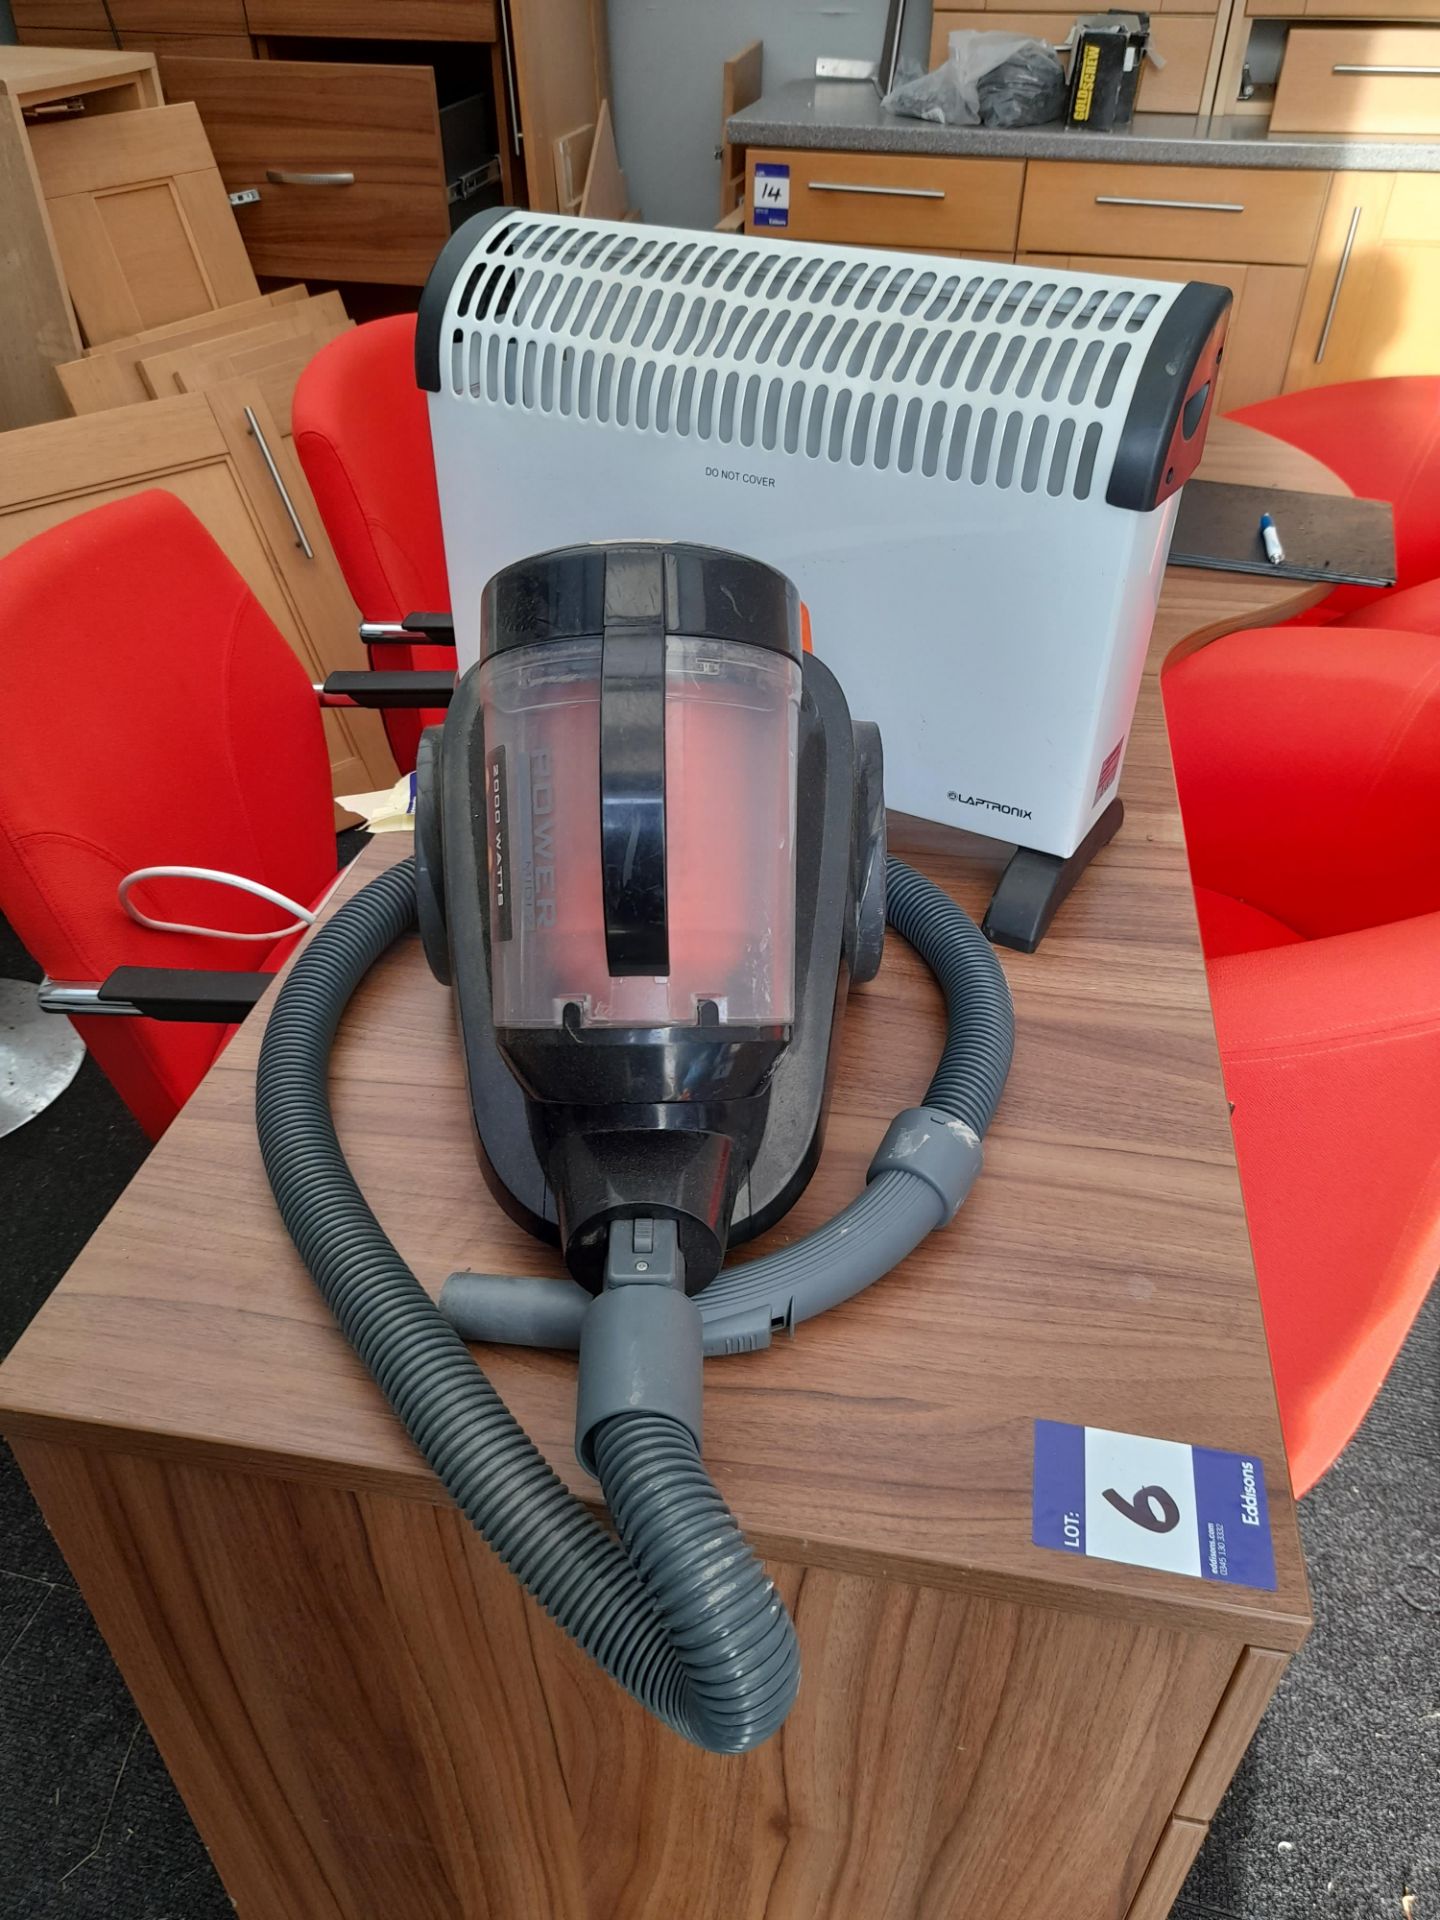 2 – Upright lamps, vacuum cleaner and heater, as photographed - Image 2 of 2